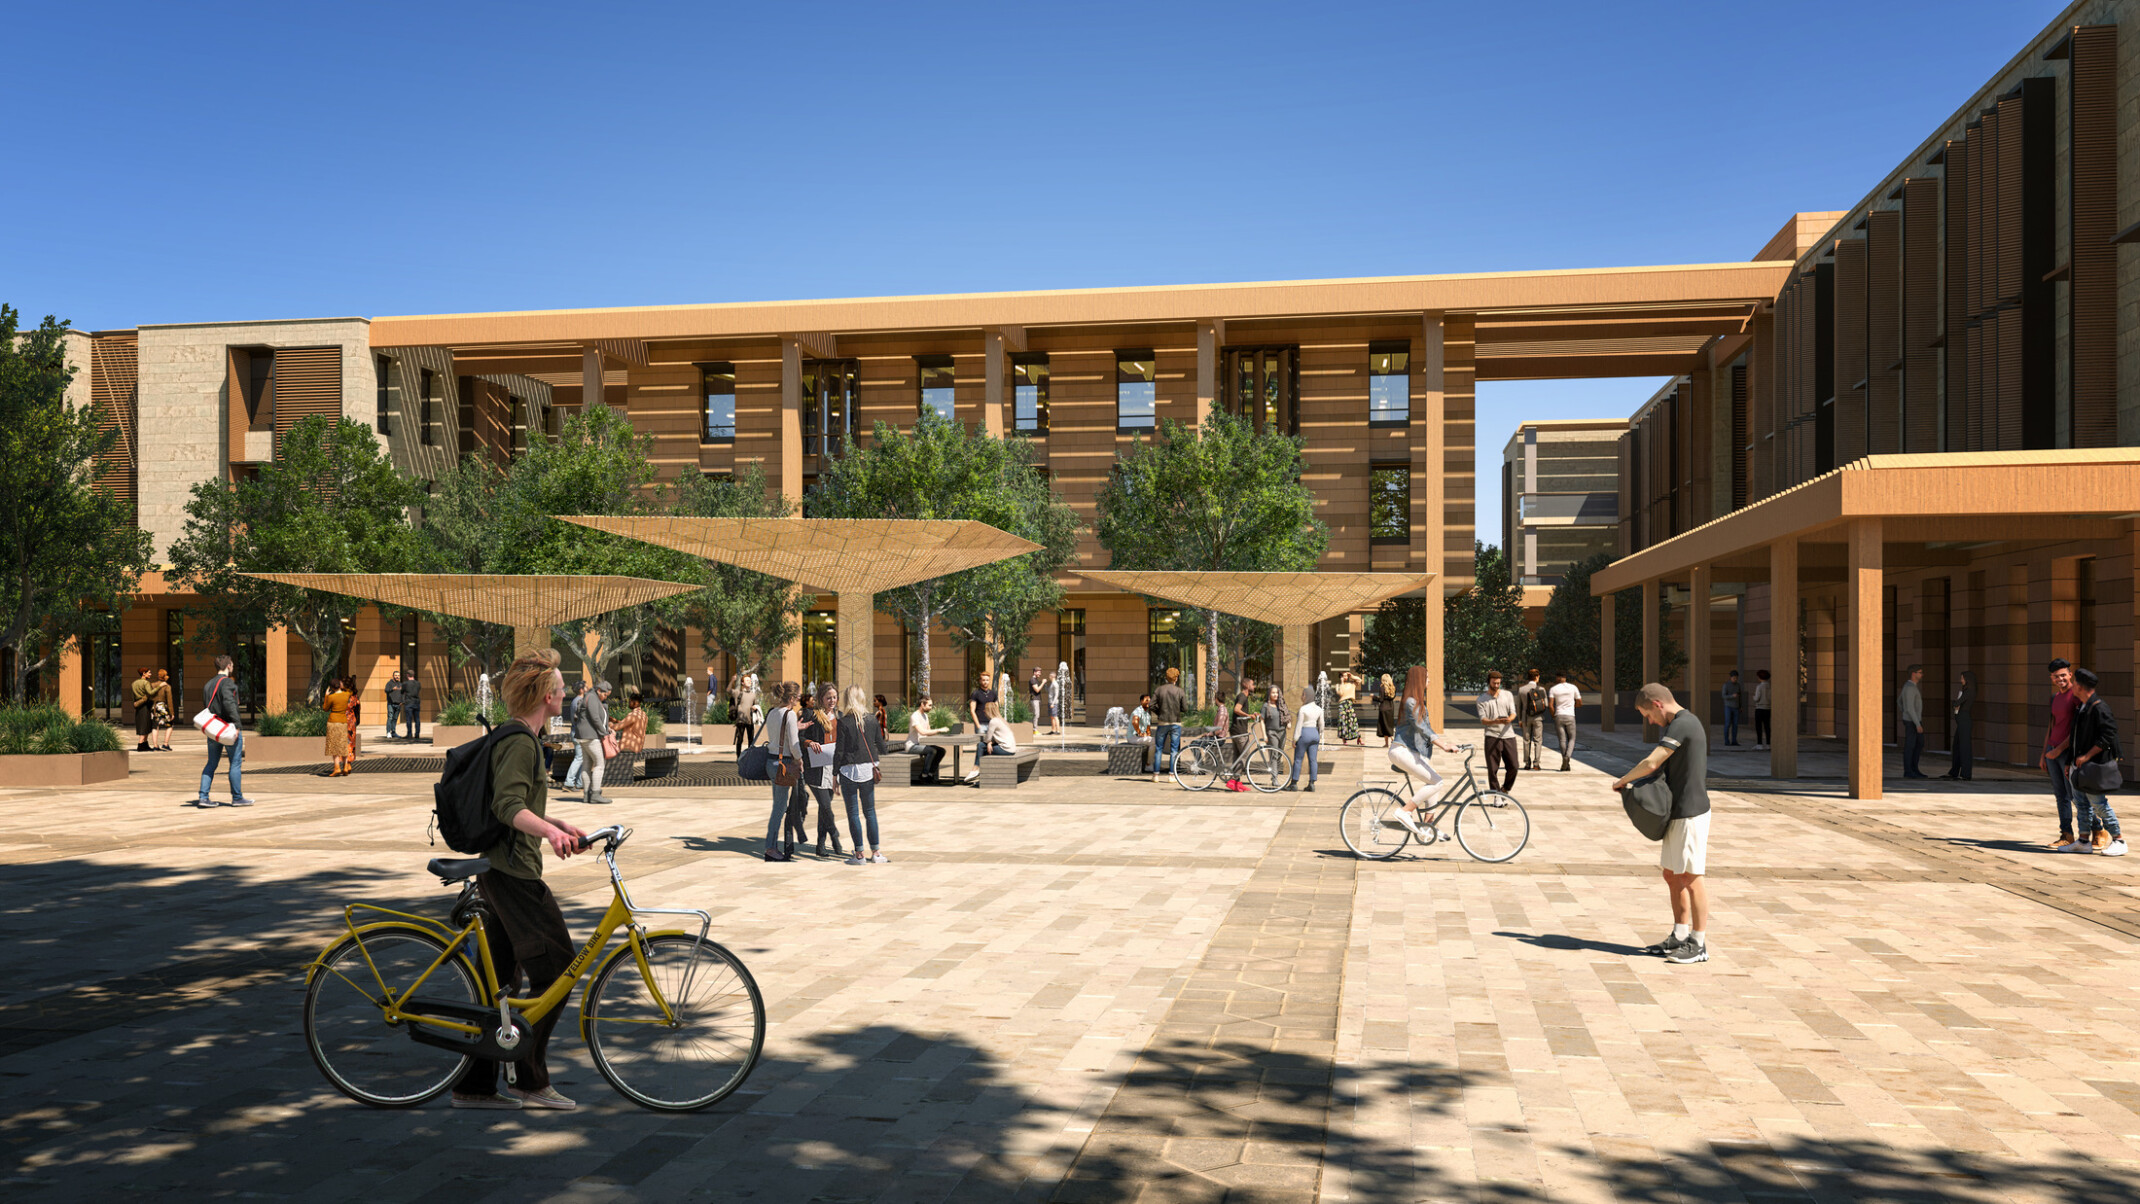 Rendering of a college campus showing a bustling outside common area between two brown modern buildings